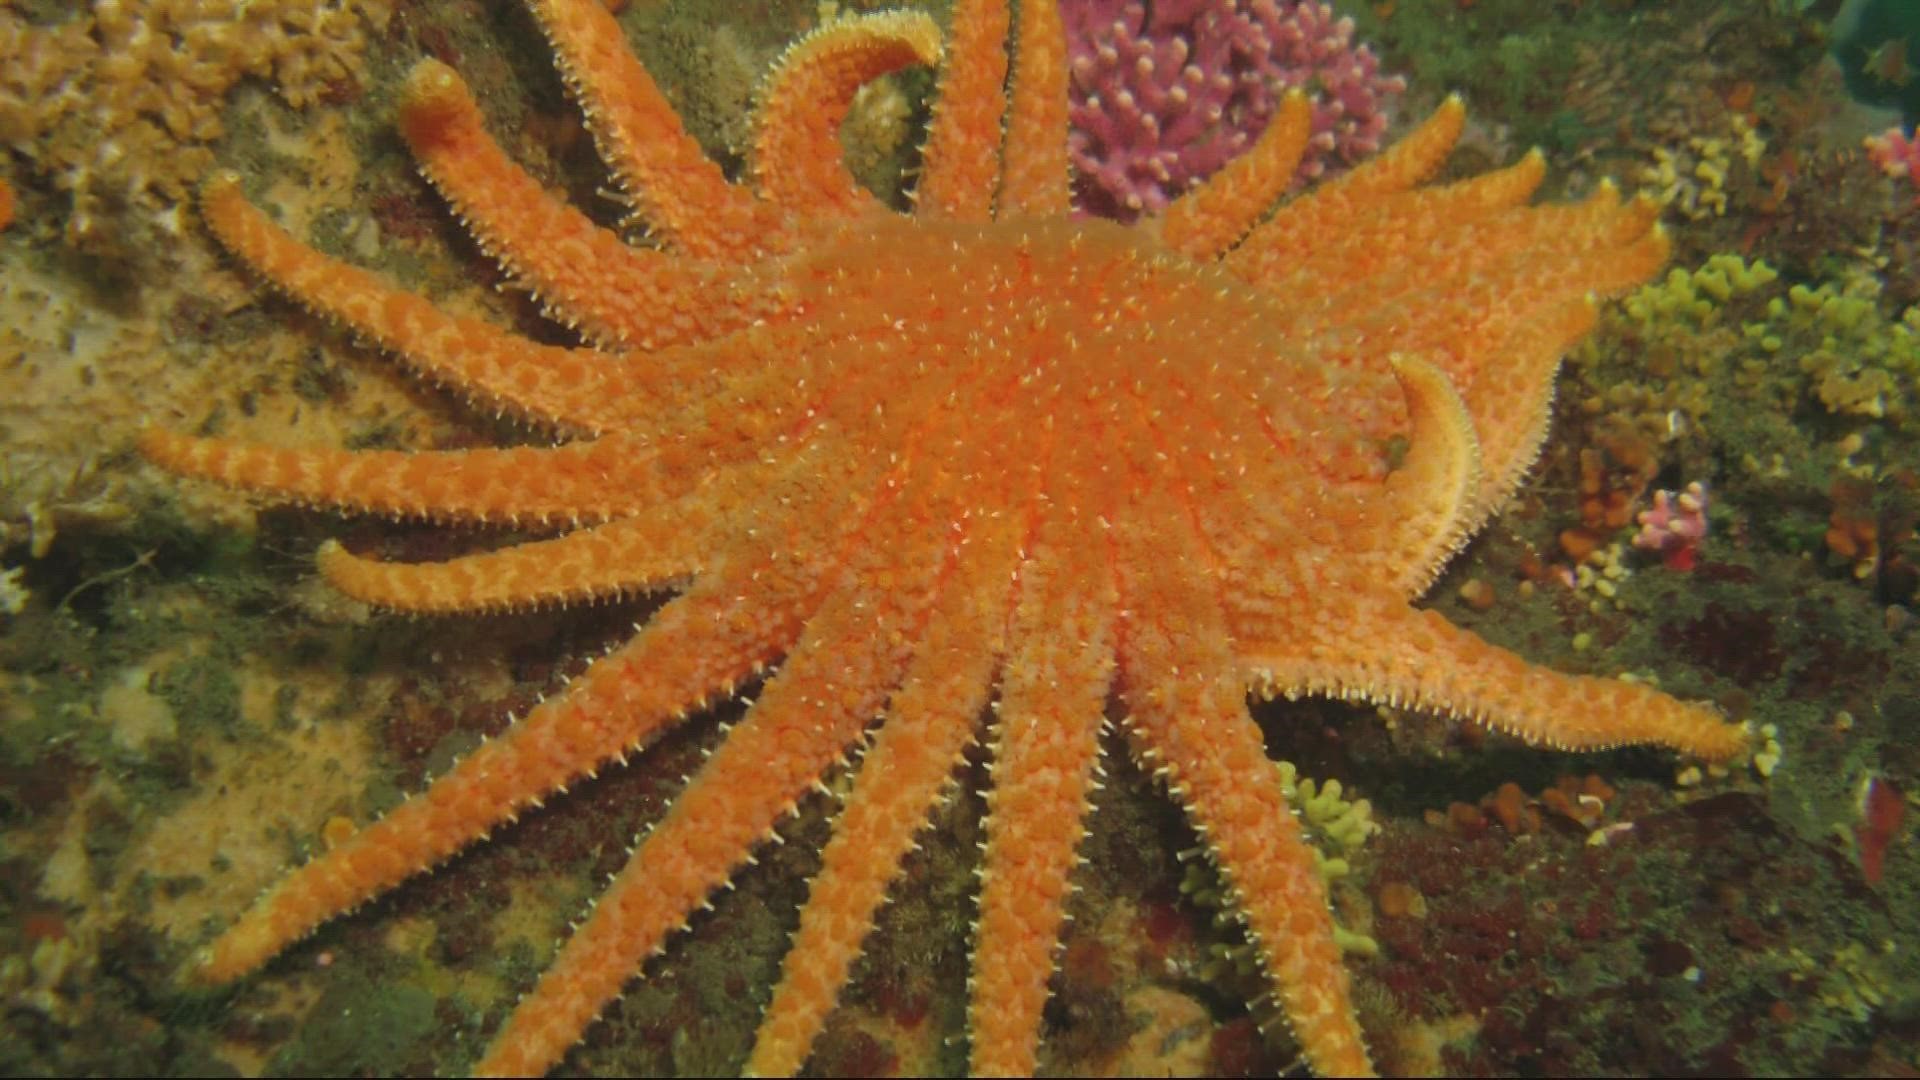 Around 2013, “sea star wasting disease” started driving Oregon coast sea stars nearly to extinction. As many as 6 billion may have died.